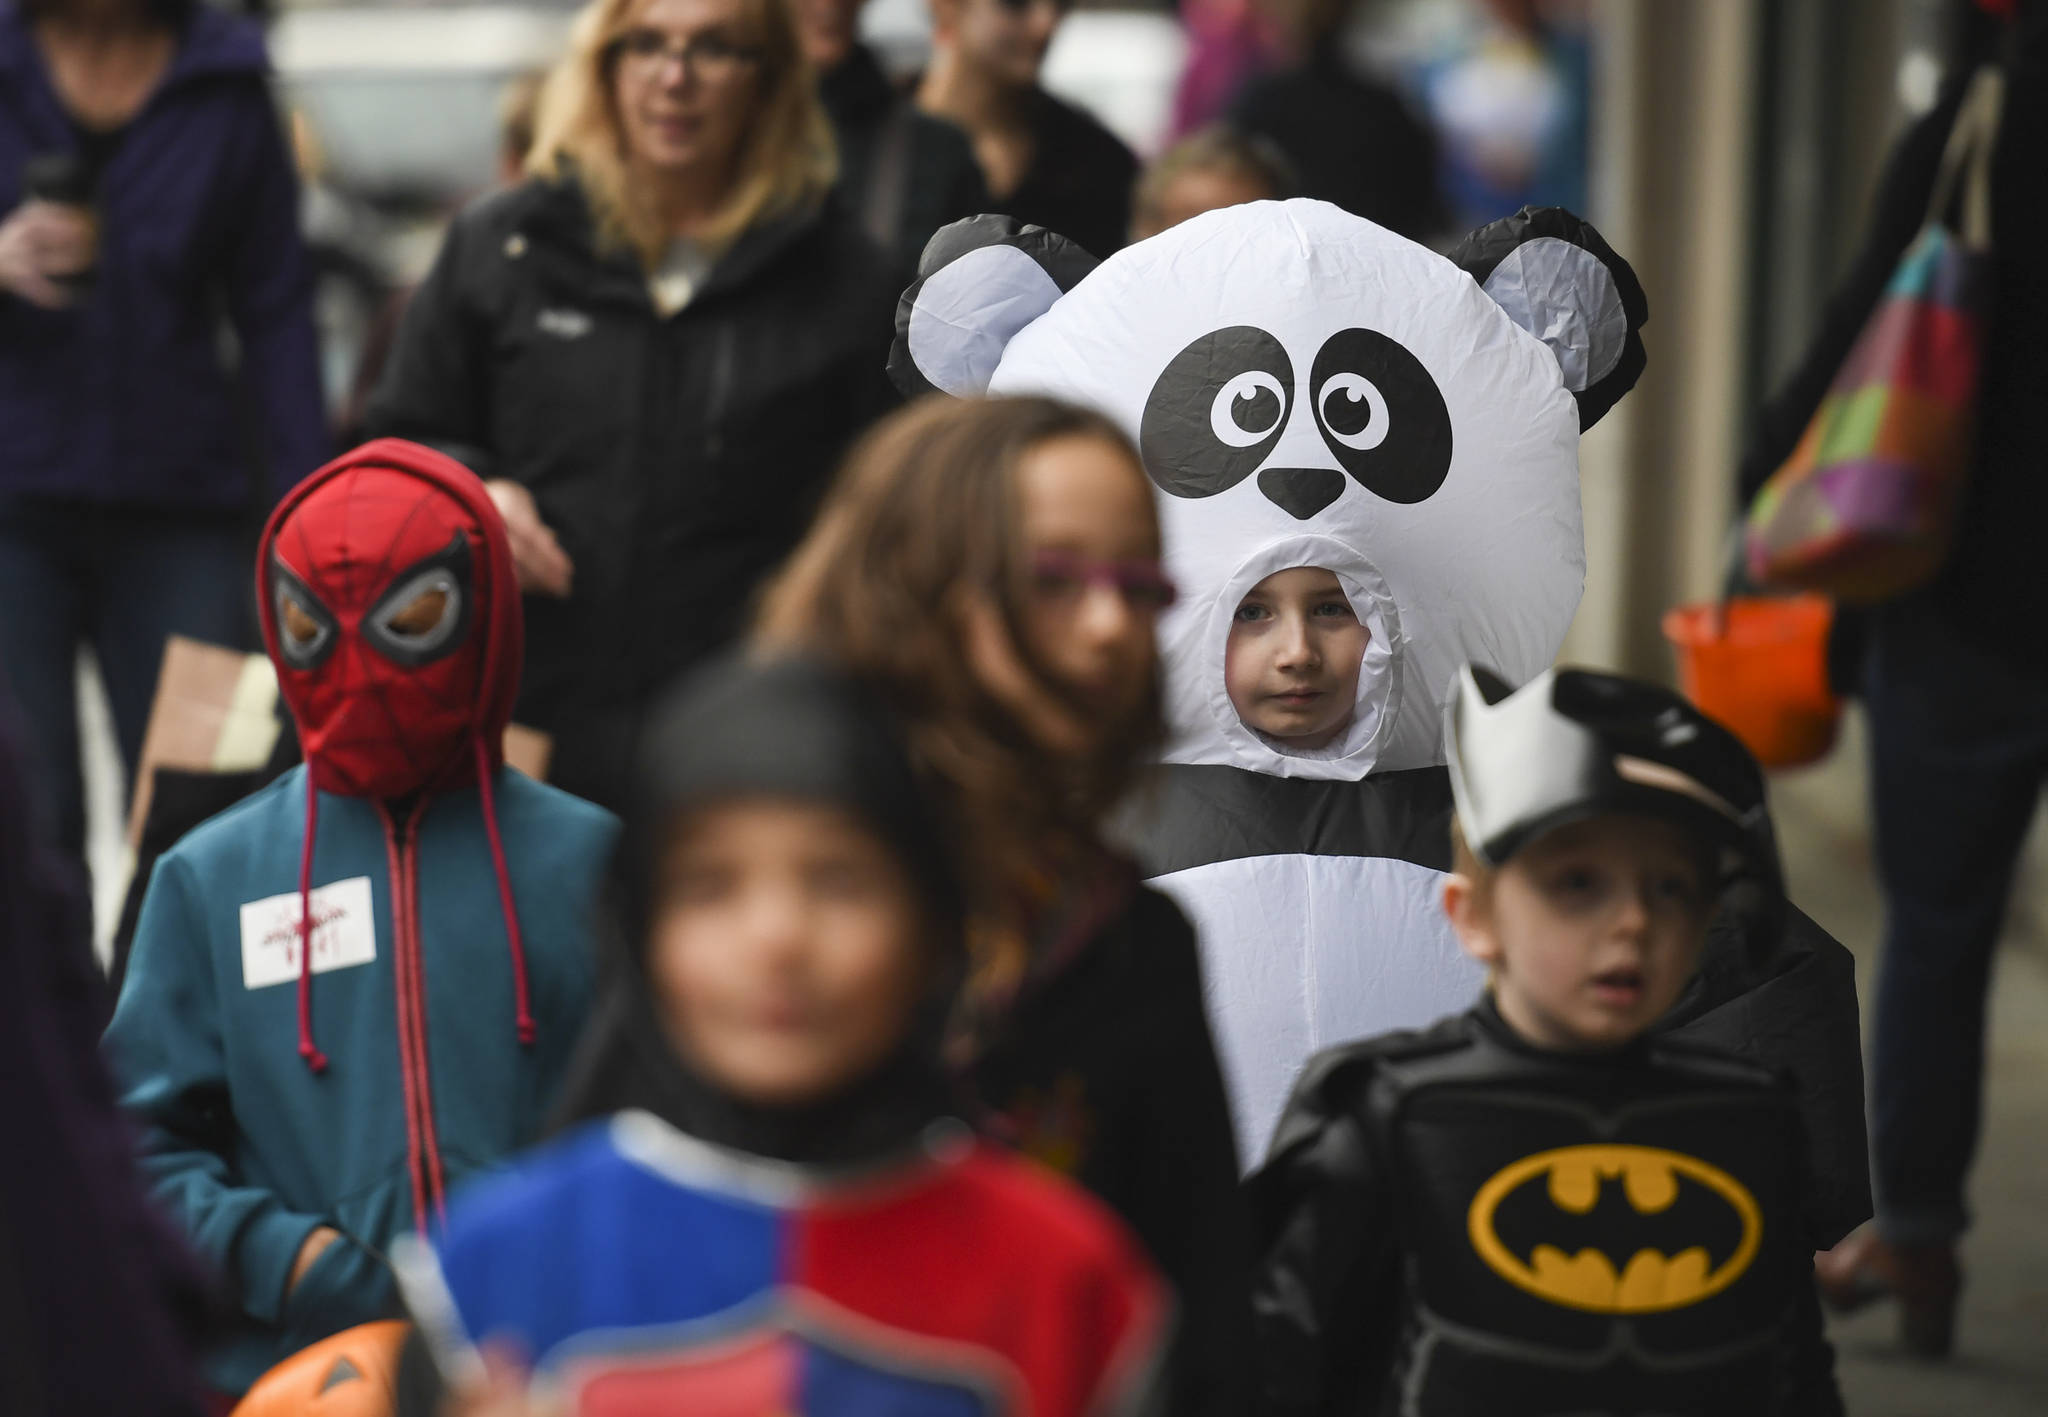 Halloween 2019: Photos of trick-or-treating in downtown Juneau